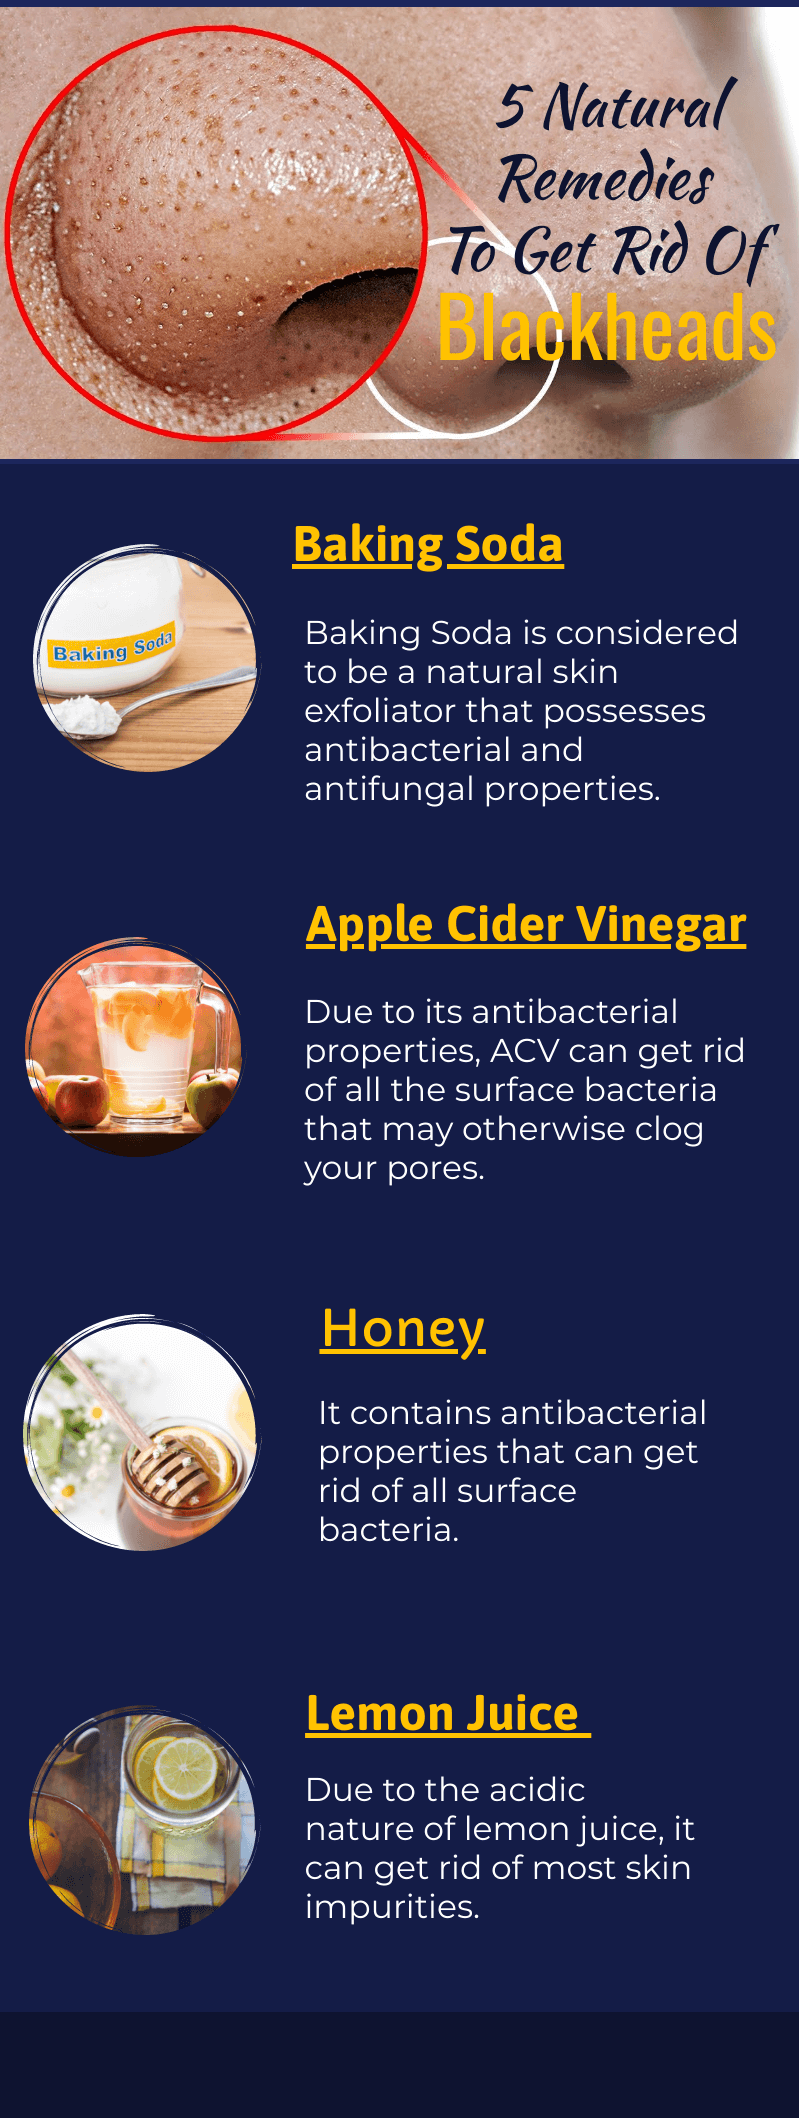 How to get rid of blackheads Infographic